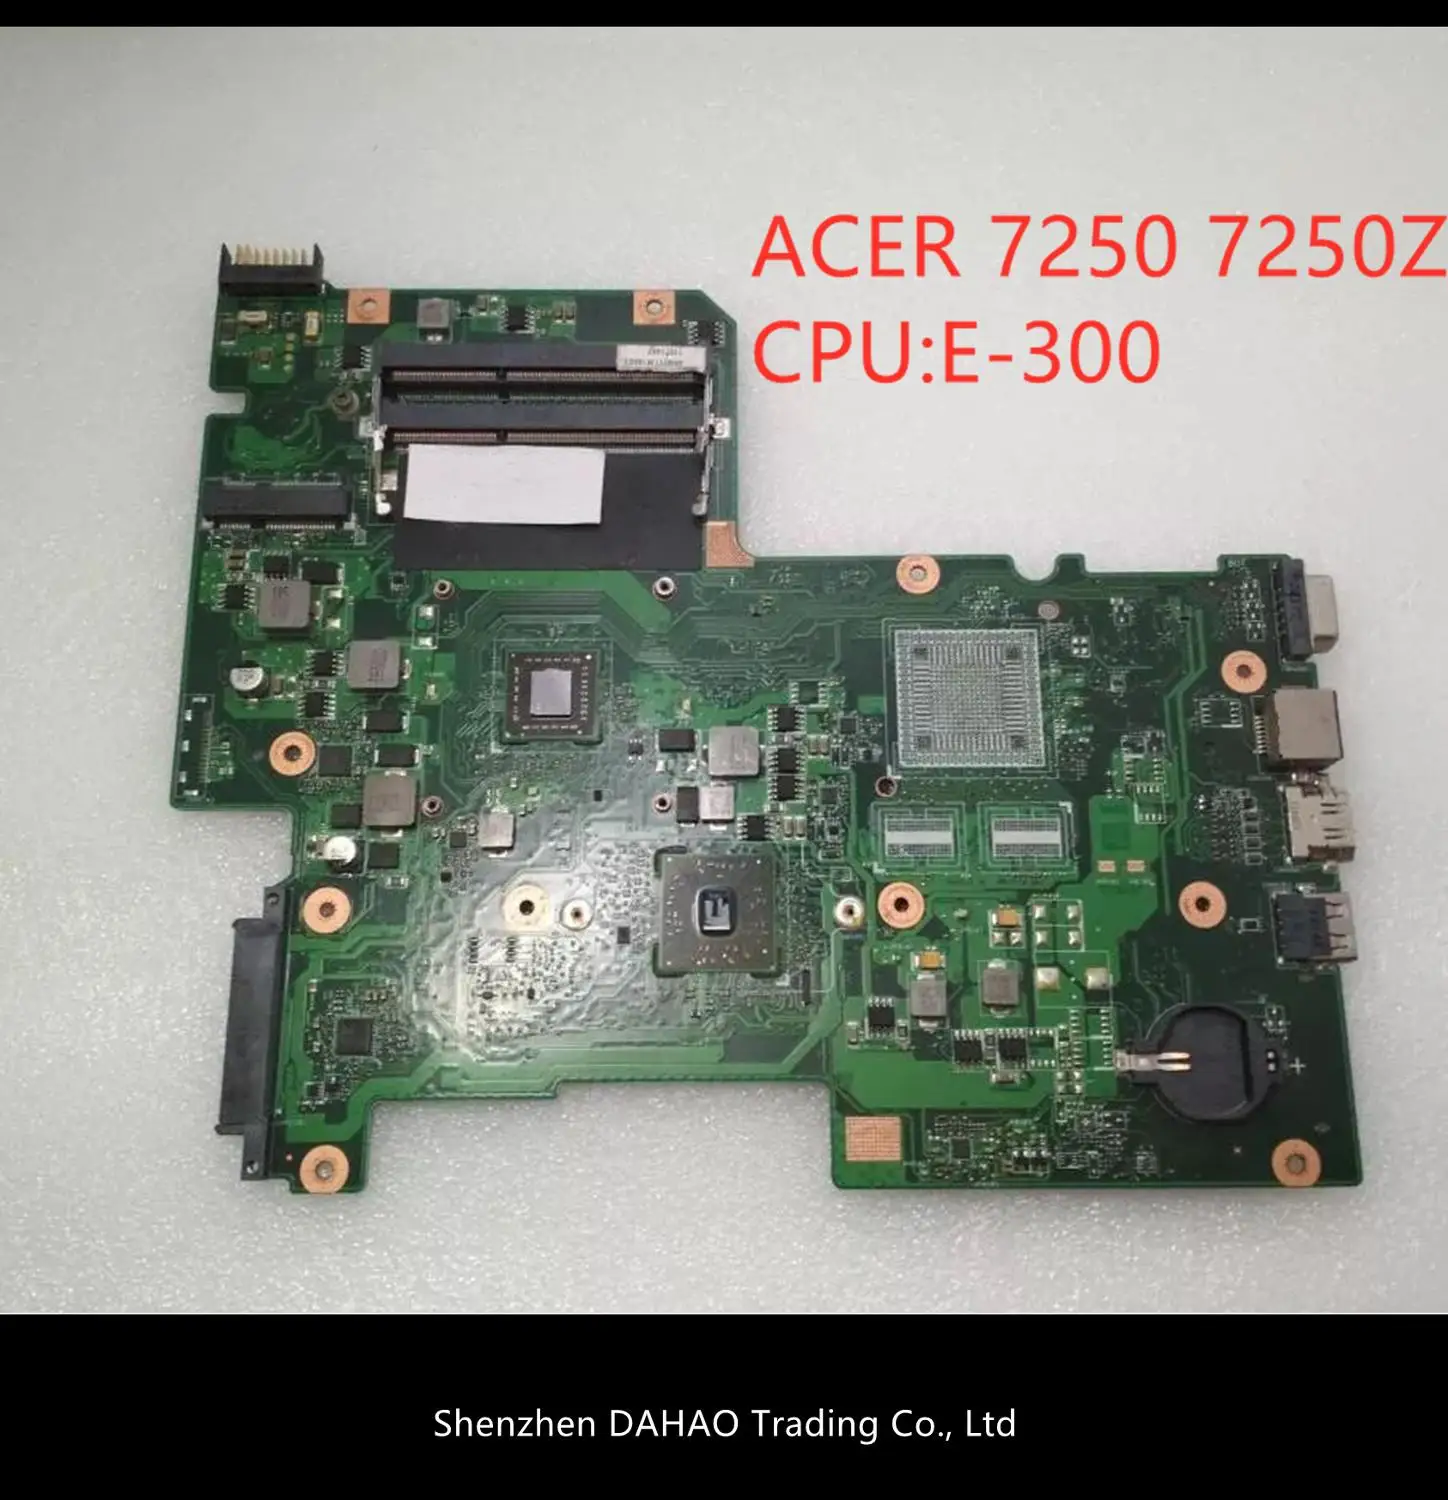 

Shenzhen DAHAO Trading Co., Ltd For Acer 7250Z 7250 Motherboard with E-300 cpu MBRL60P004 AAB70